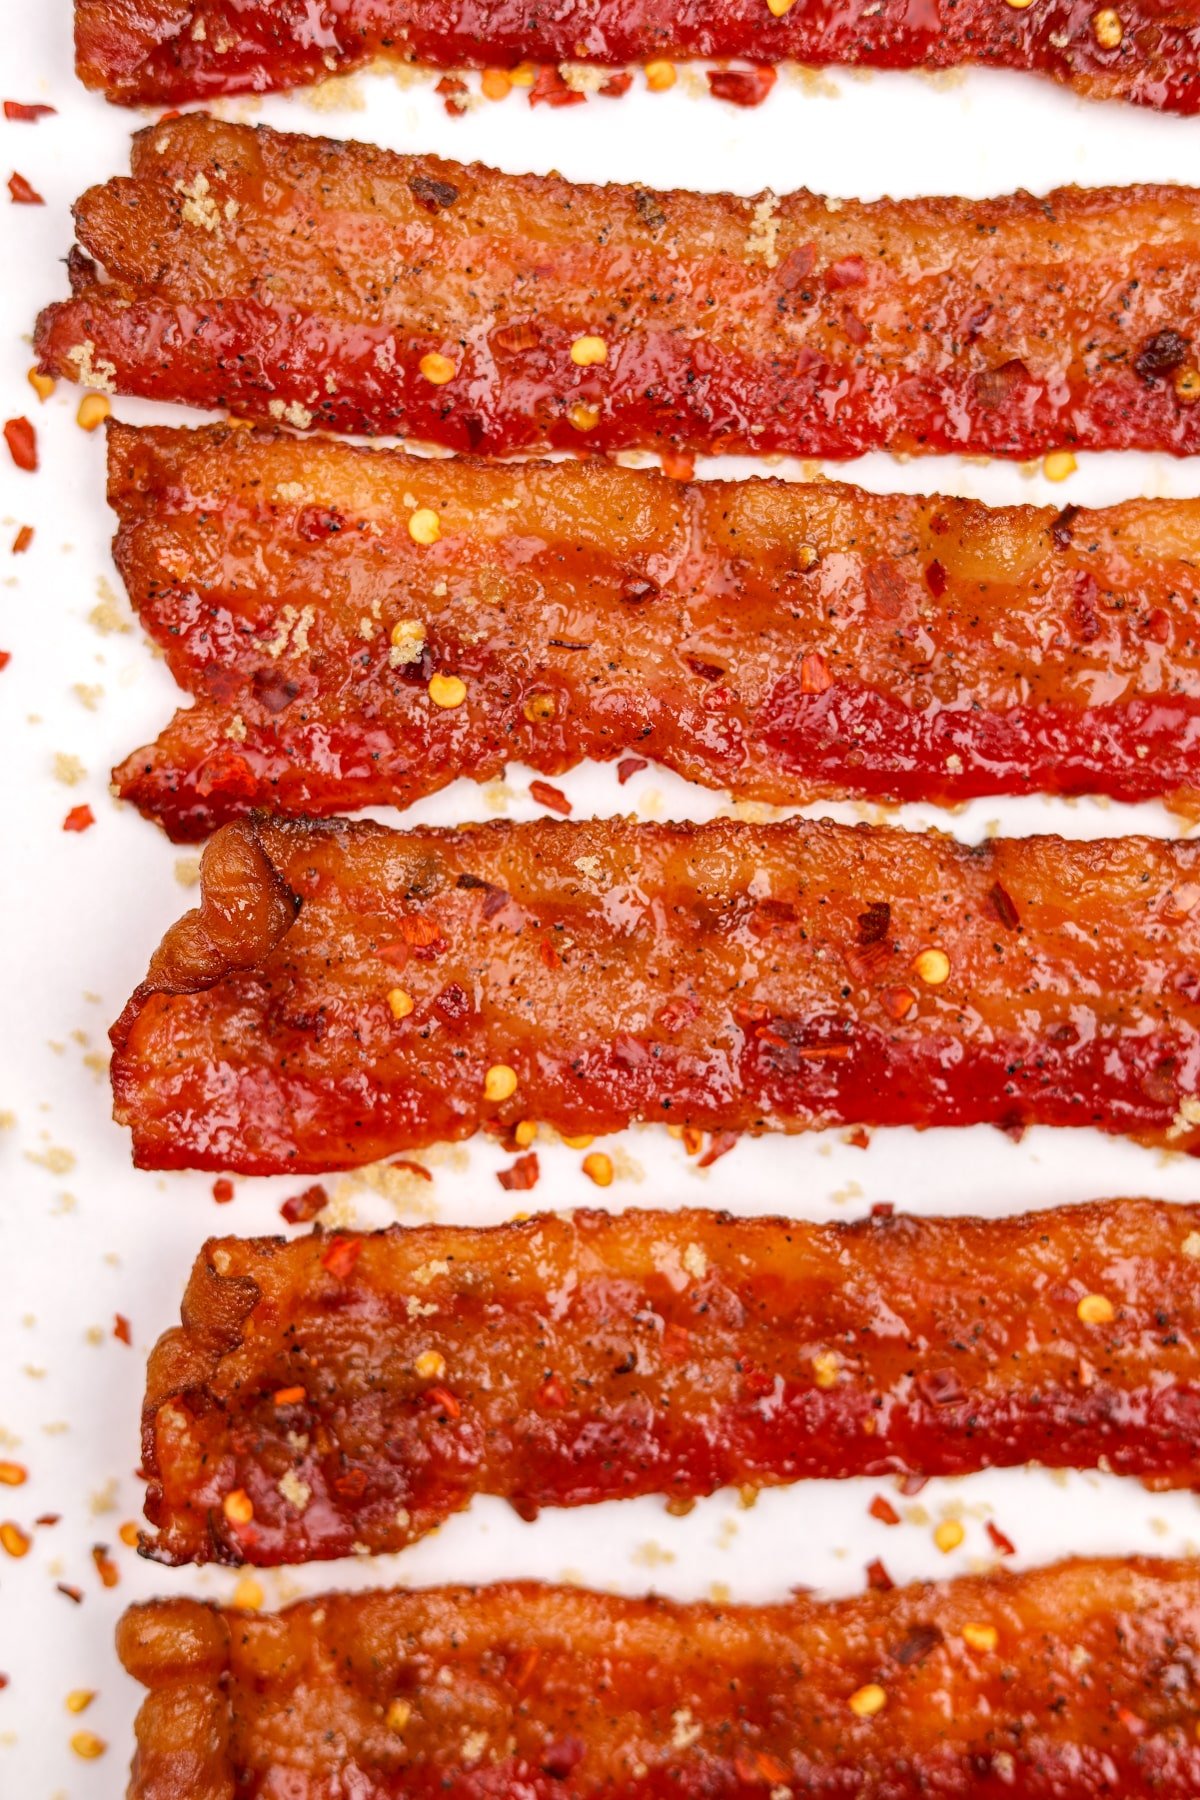 Slices of bacon that are coated with a sweet and spicy glaze.